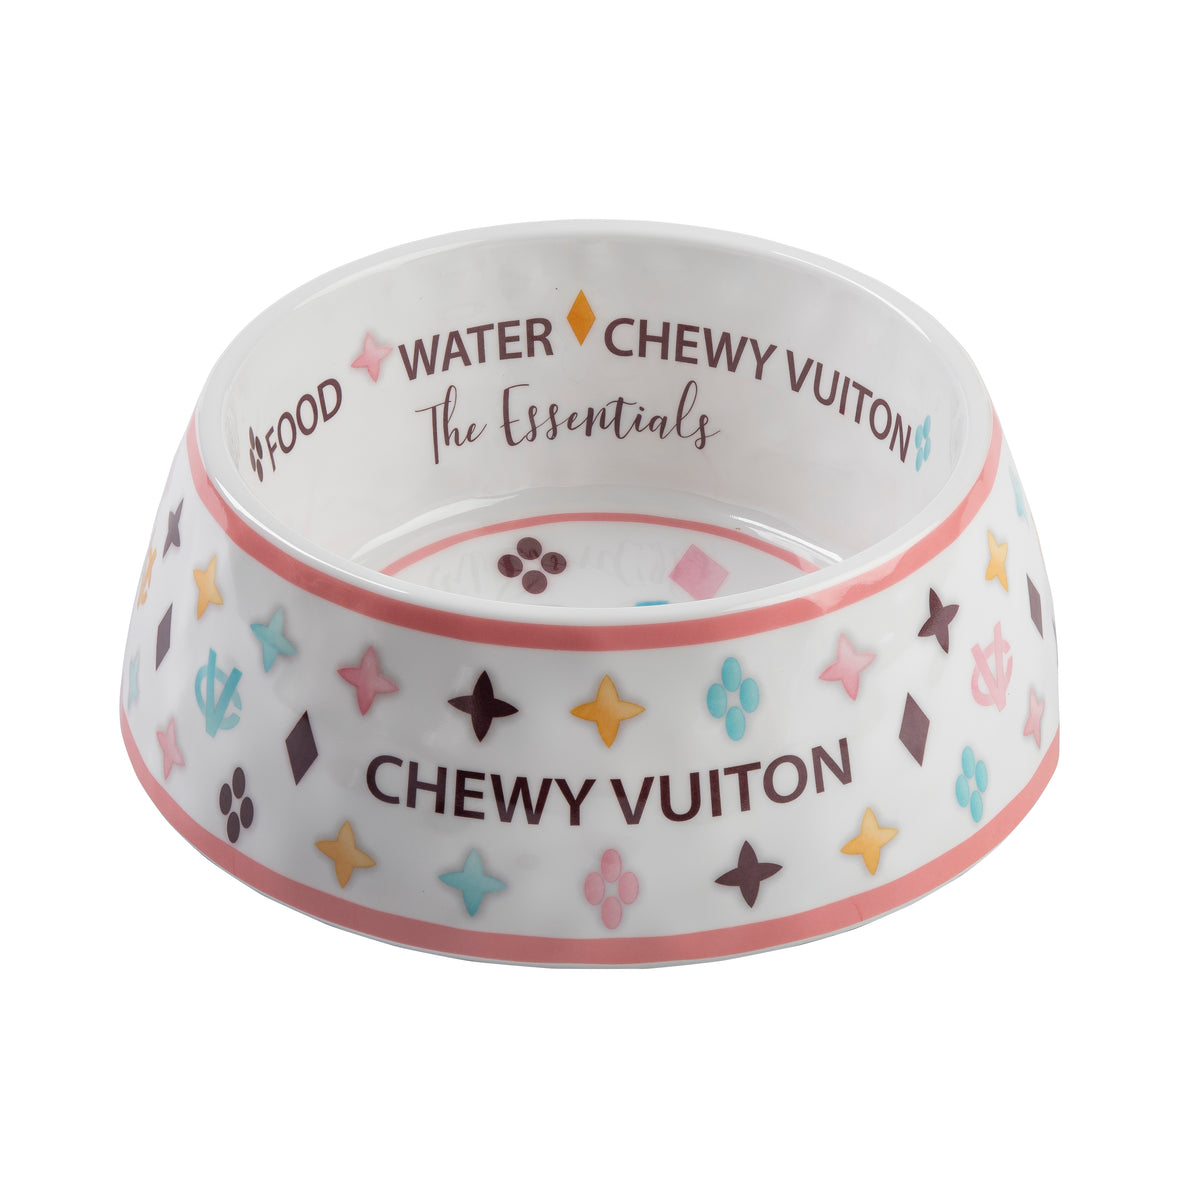 White Chewy Vuiton Bowl - Medium (CASE OF 2) by Haute Diggity Dog